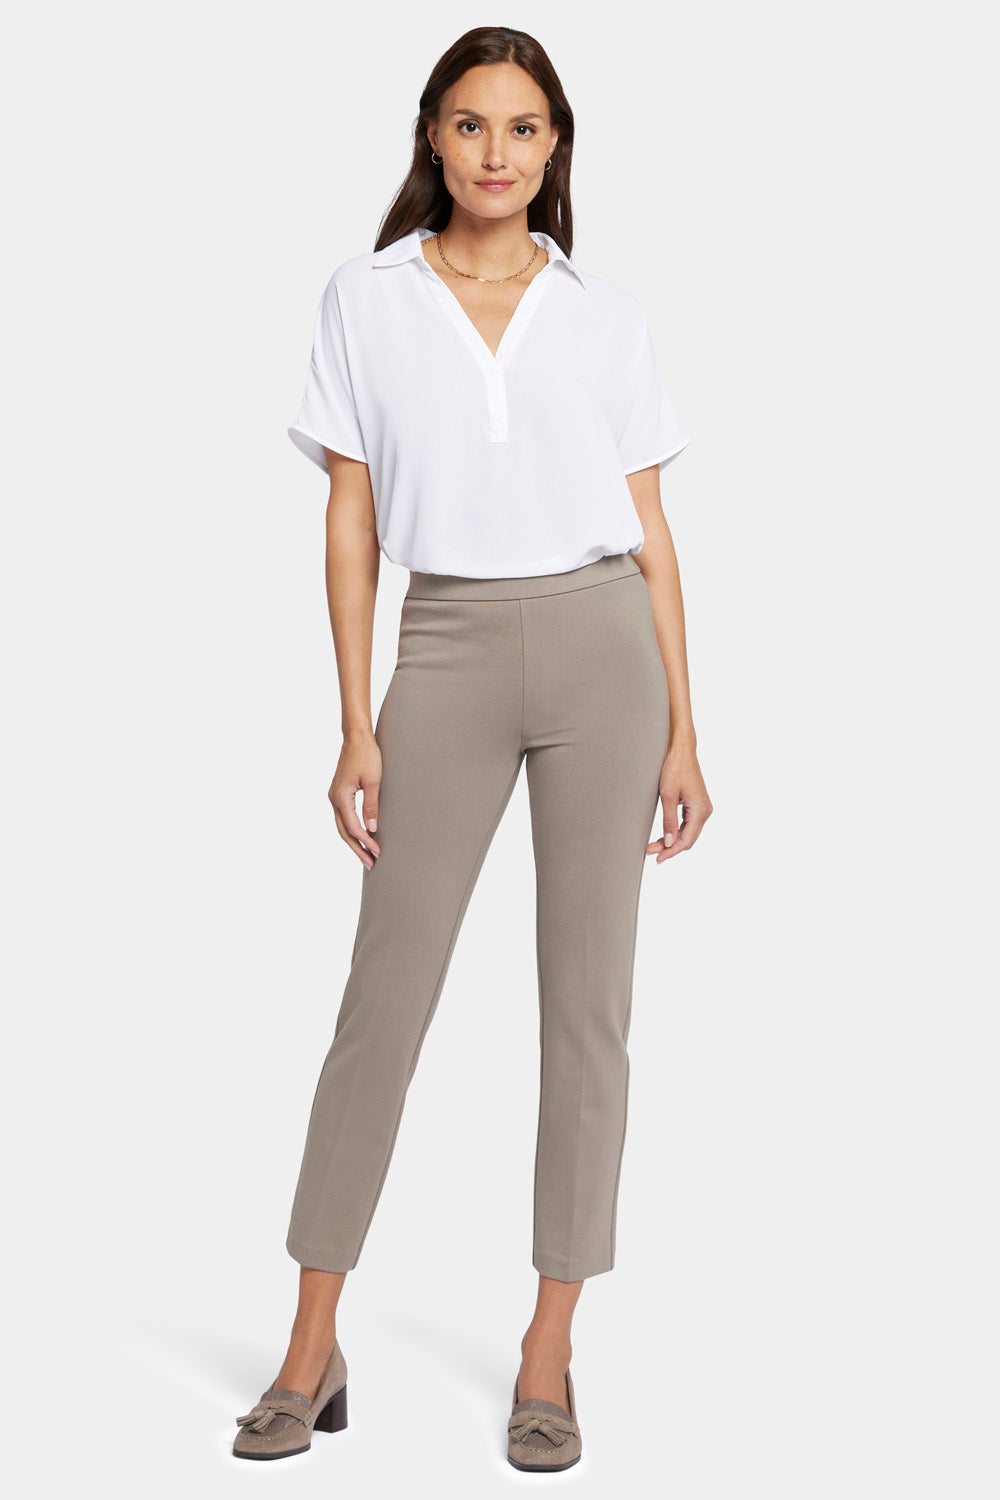 Buy Reelize - Plazo Jeans For Women, Knotted, Mid Waist, Straight Fit,  Ankle Length, Ideal For Party / Office / Casual Wear, Beige, Size-26